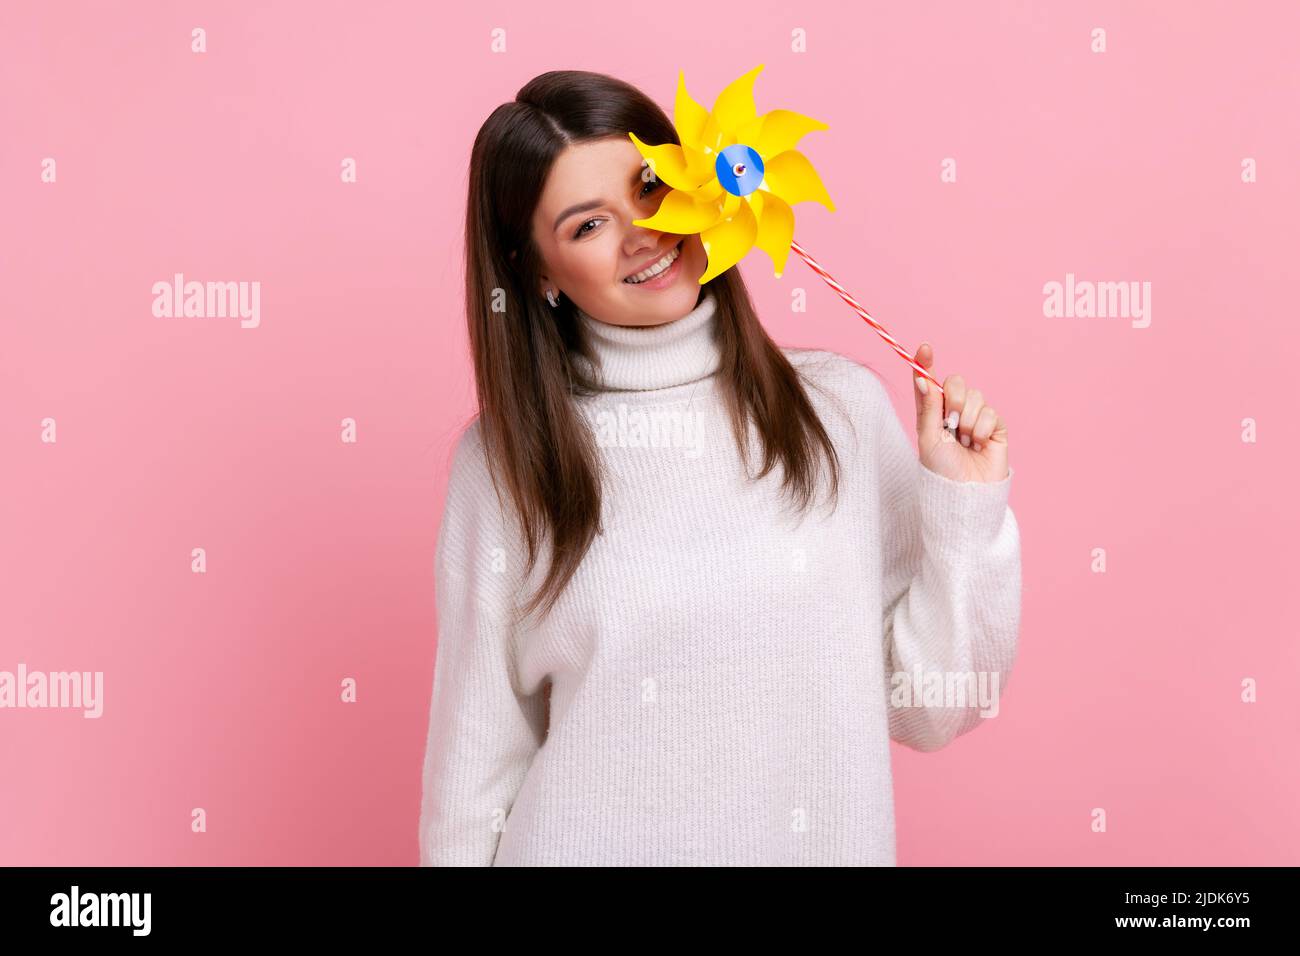 Childish dark haired female covering eye with paper windmill, playing with pinwheel toy on stick, wearing white casual style sweater. Indoor studio shot isolated on pink background. Stock Photo